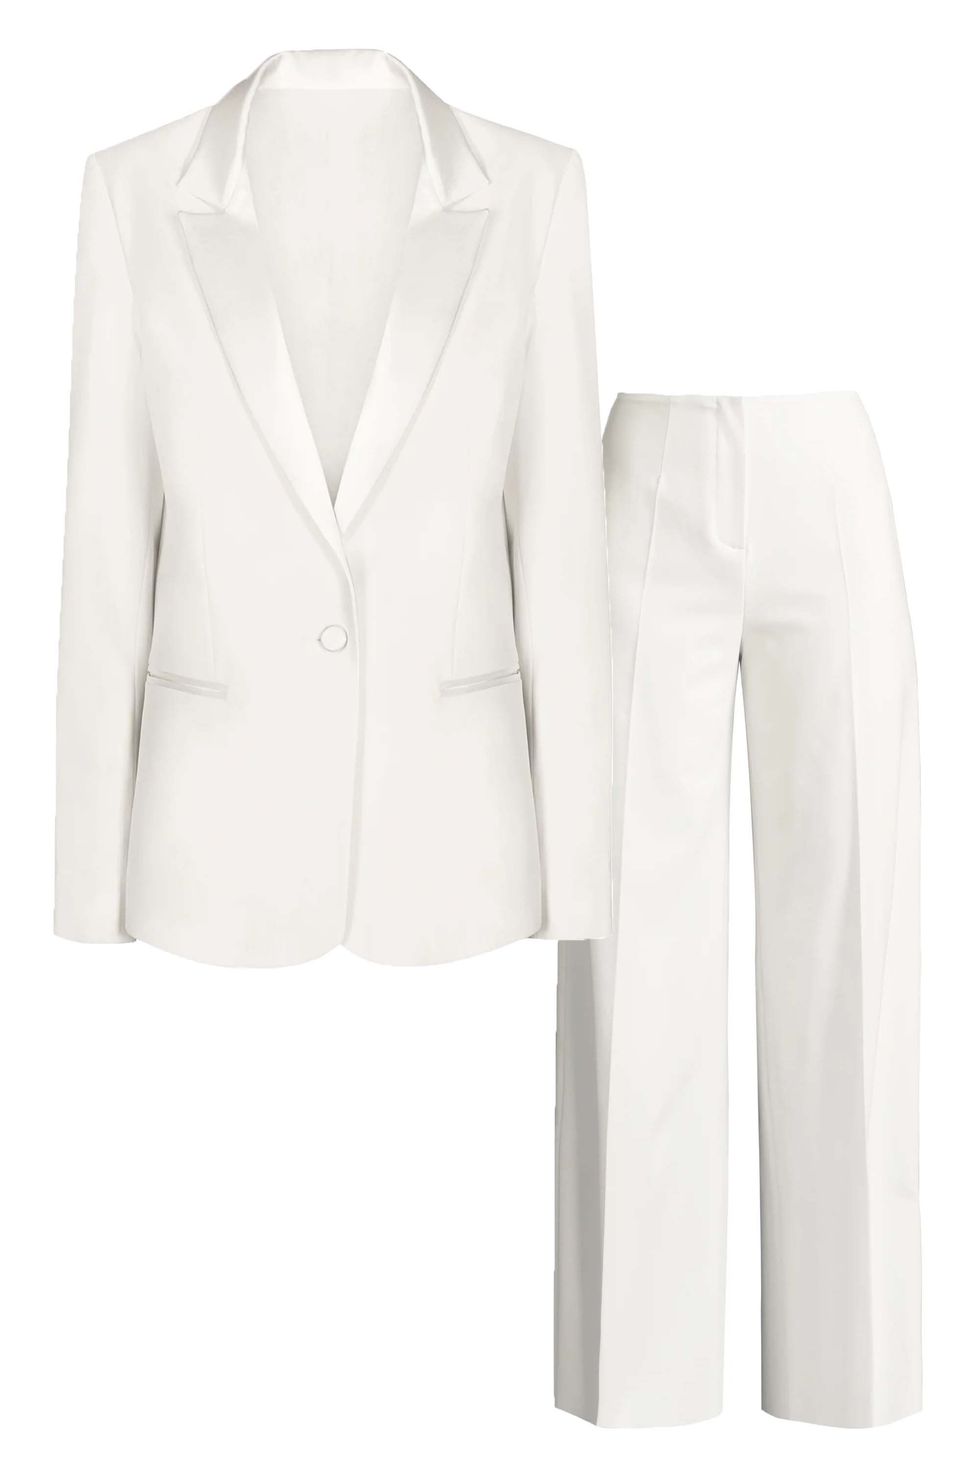 Wedding suits for brides – The best bridal suits to buy now